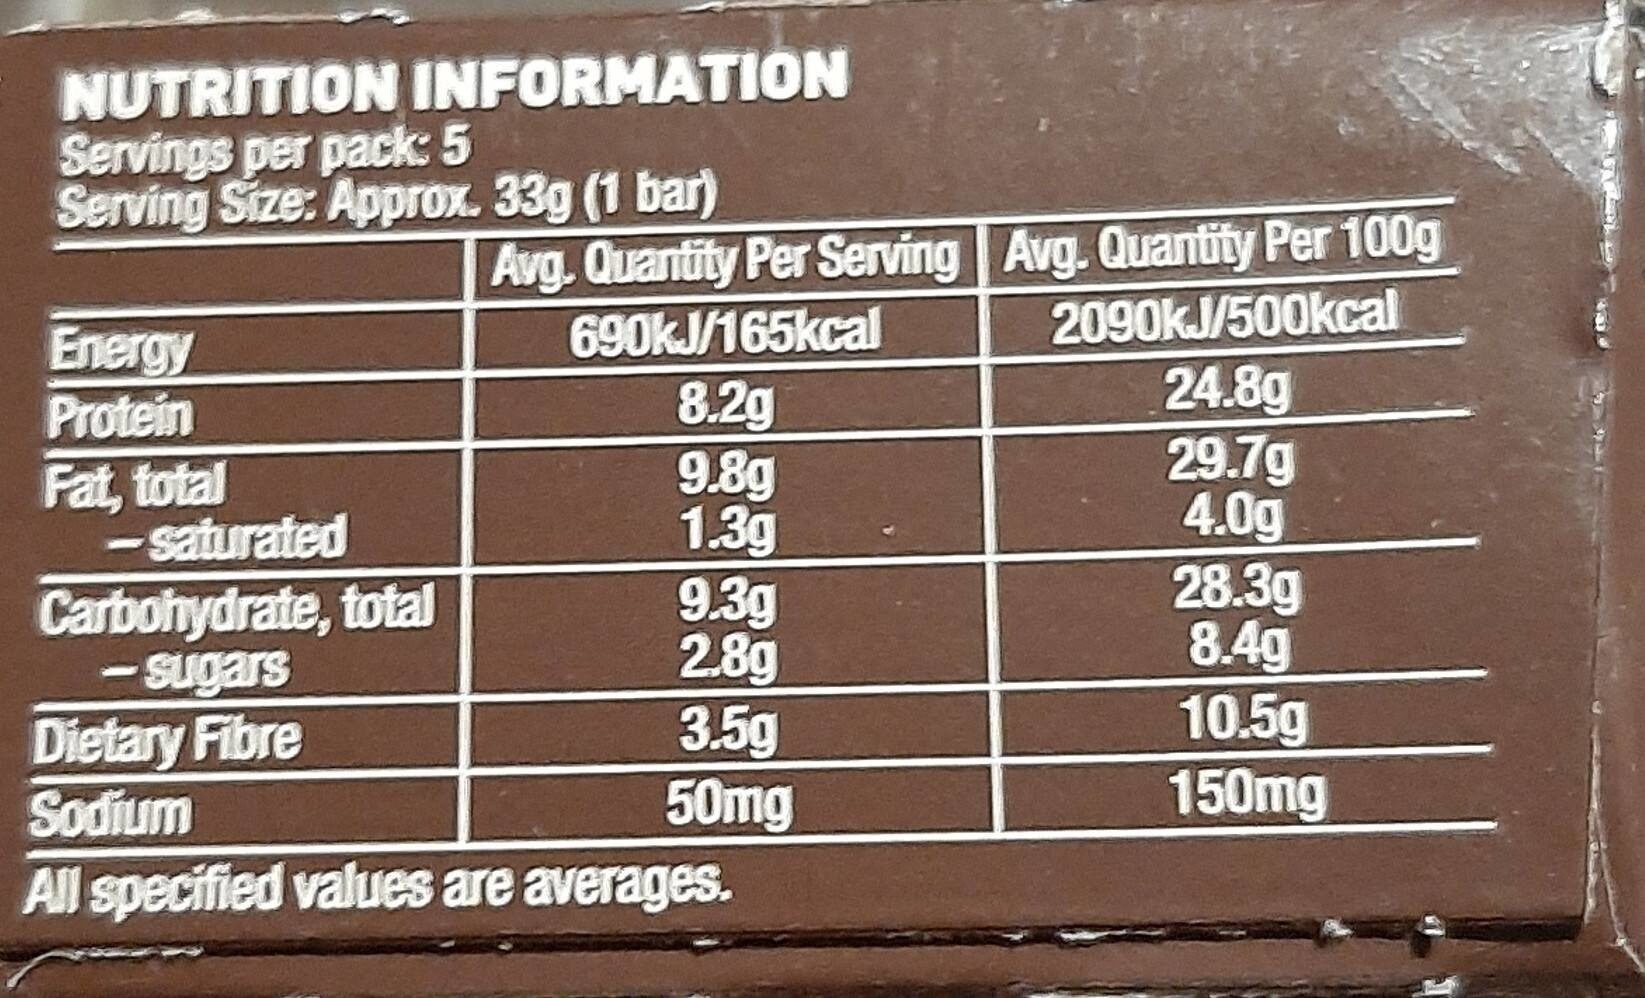 Nice & Natural Protein Nut Bars - Nutrition facts